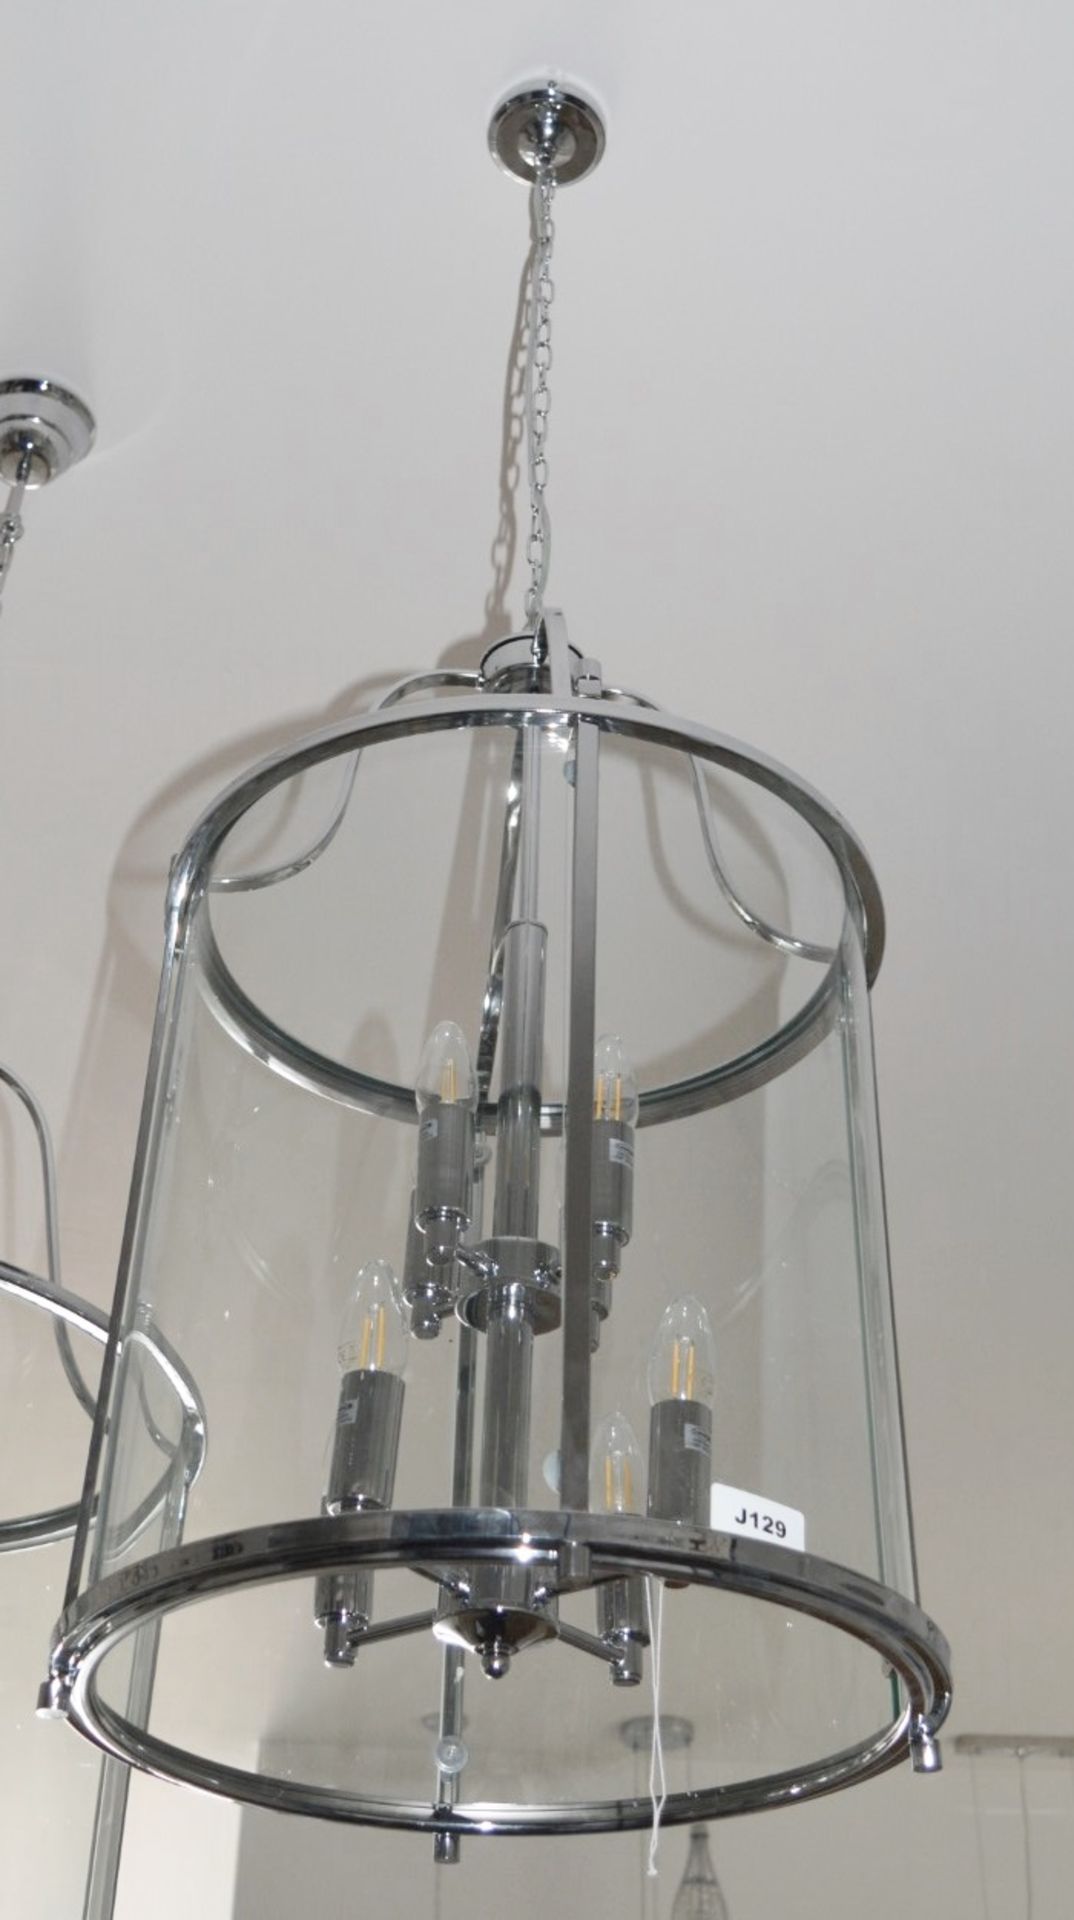 1 x Victorian Lantern Chrome 8-Light Ceiling Fitting With Clear Glass Panels - RRP £576.00 - Image 3 of 5